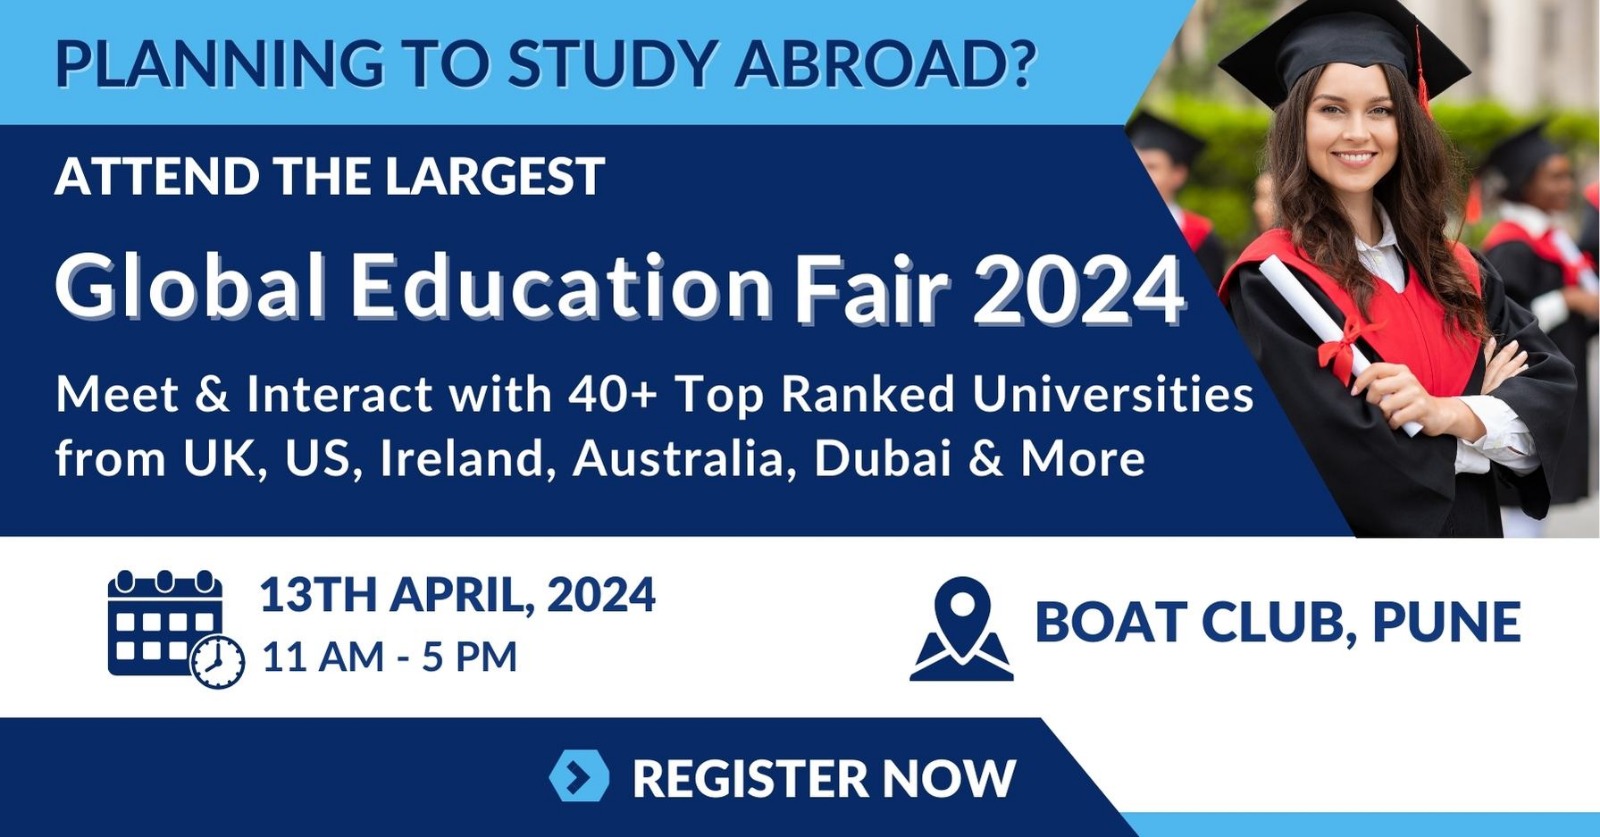 Global education Fair 2024 Pune, For Students Who Wants to Study Abroad